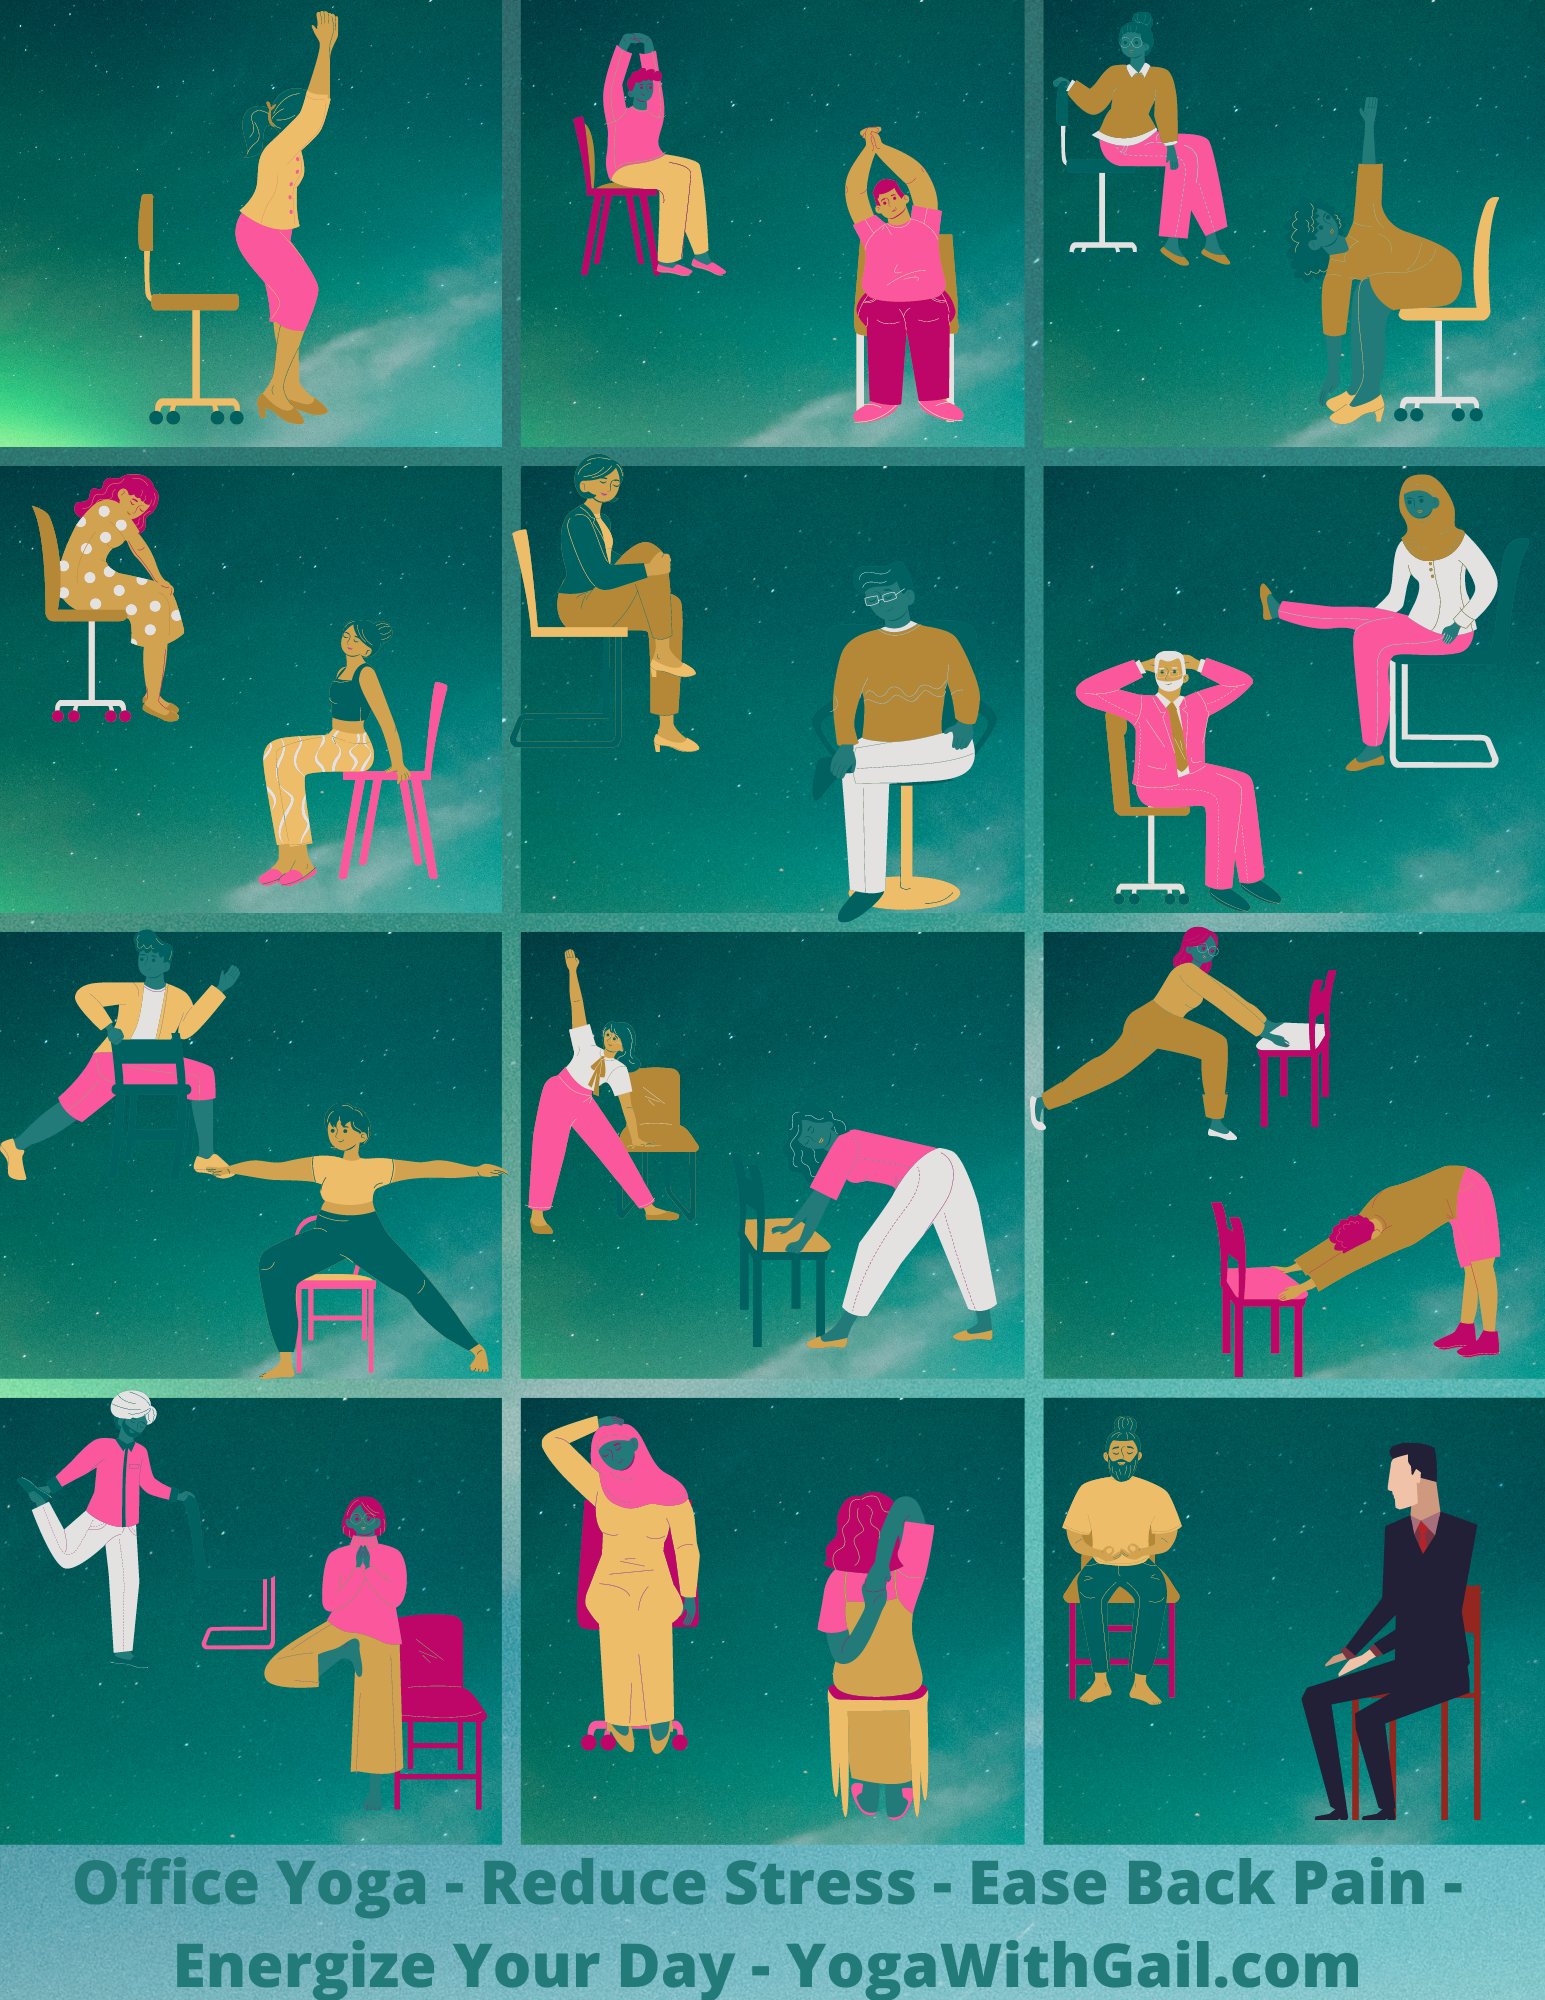 Chair Yoga Fitness #chairyogafitness with Gail.  Reduce stress, ease back pain with chair yoga!